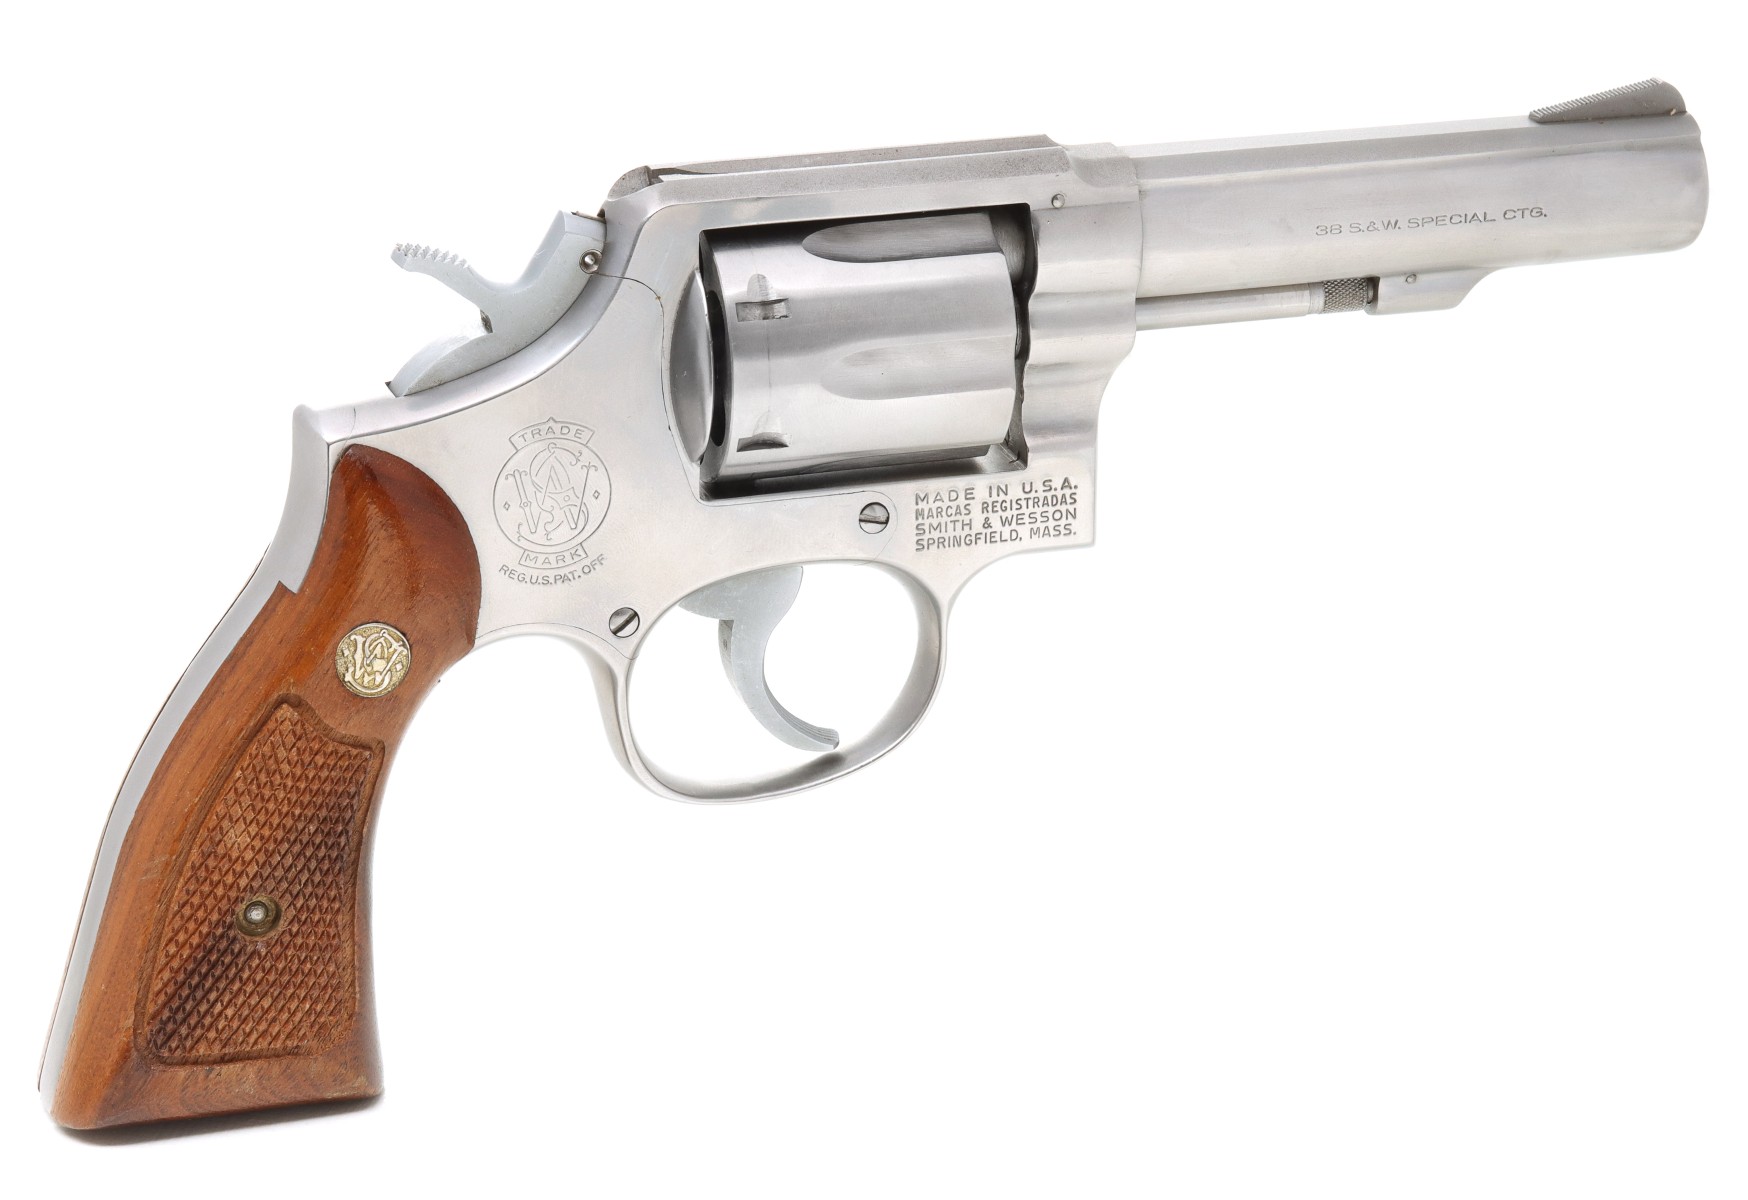 A BOXED STAINLESS STEEL SMITH & WESSON 38 CAL REVOLVER